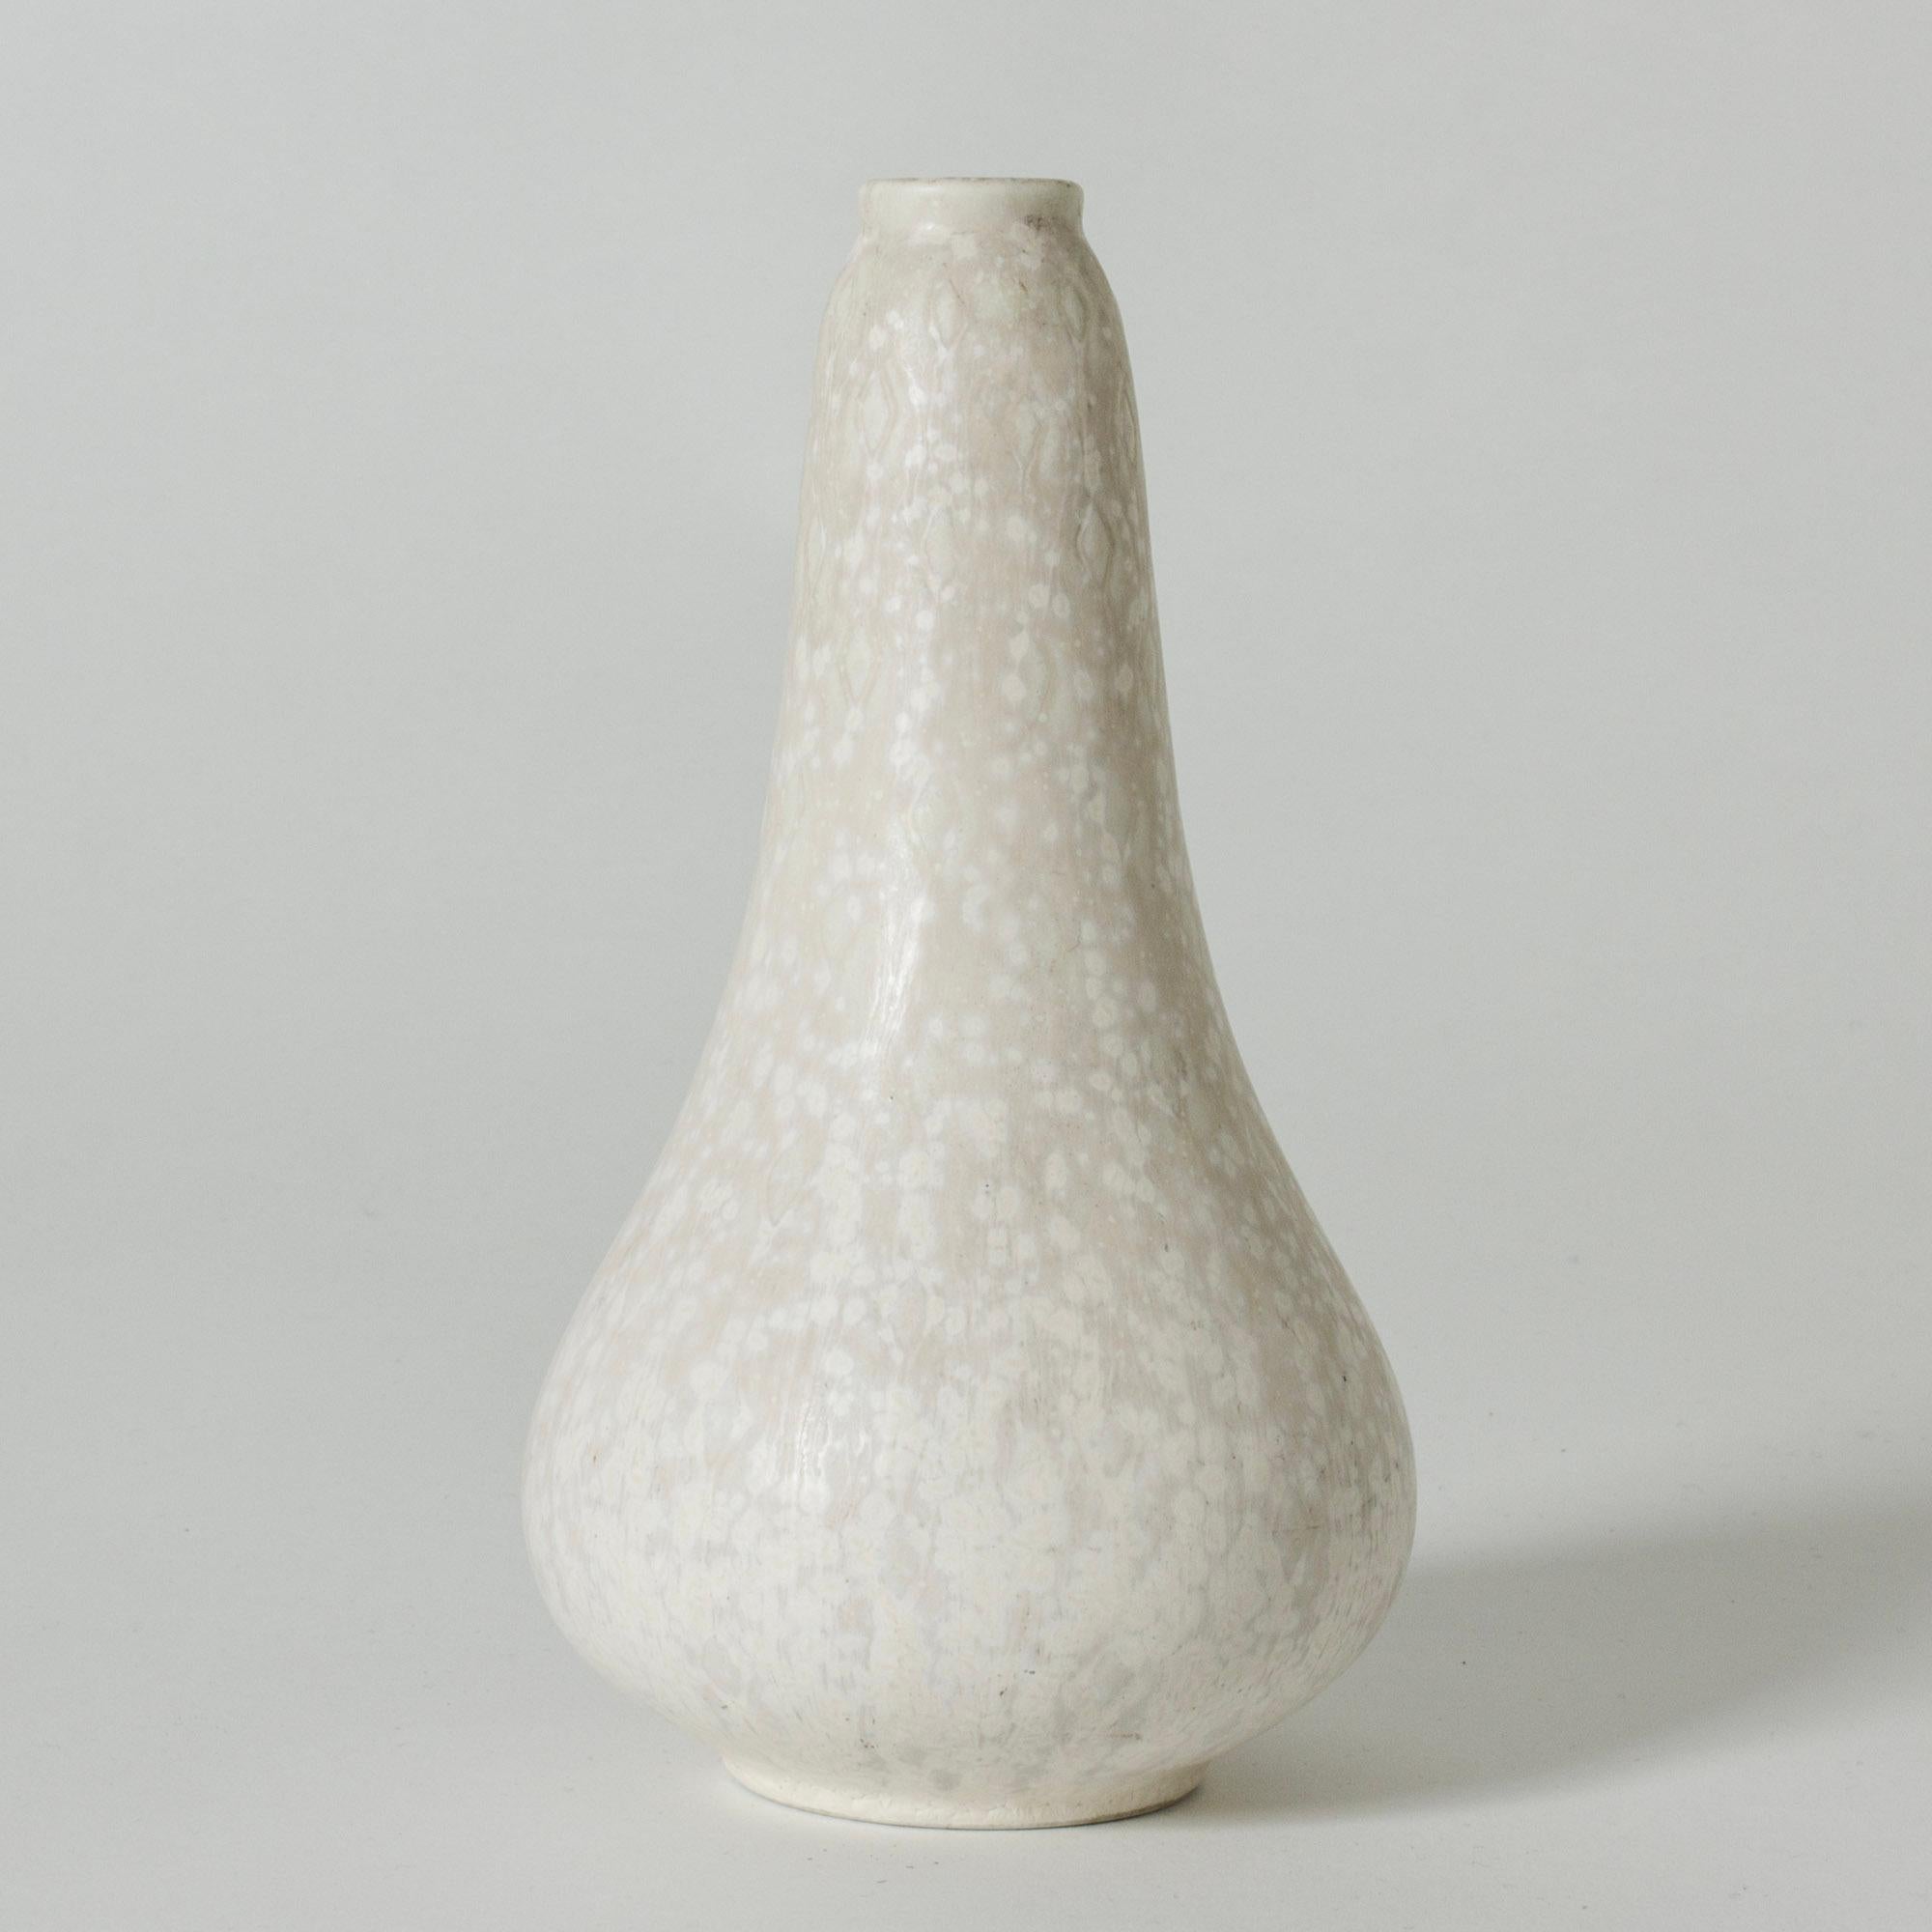 Neat stoneware vase by Gunnar Nylund, in a drop form. Glazed eggshell white over a subtle graphic pattern.

Gunnar Nylund was one of the most influential ceramicists and designers of the Swedish mid-century period. He was Rörstrand’s creative